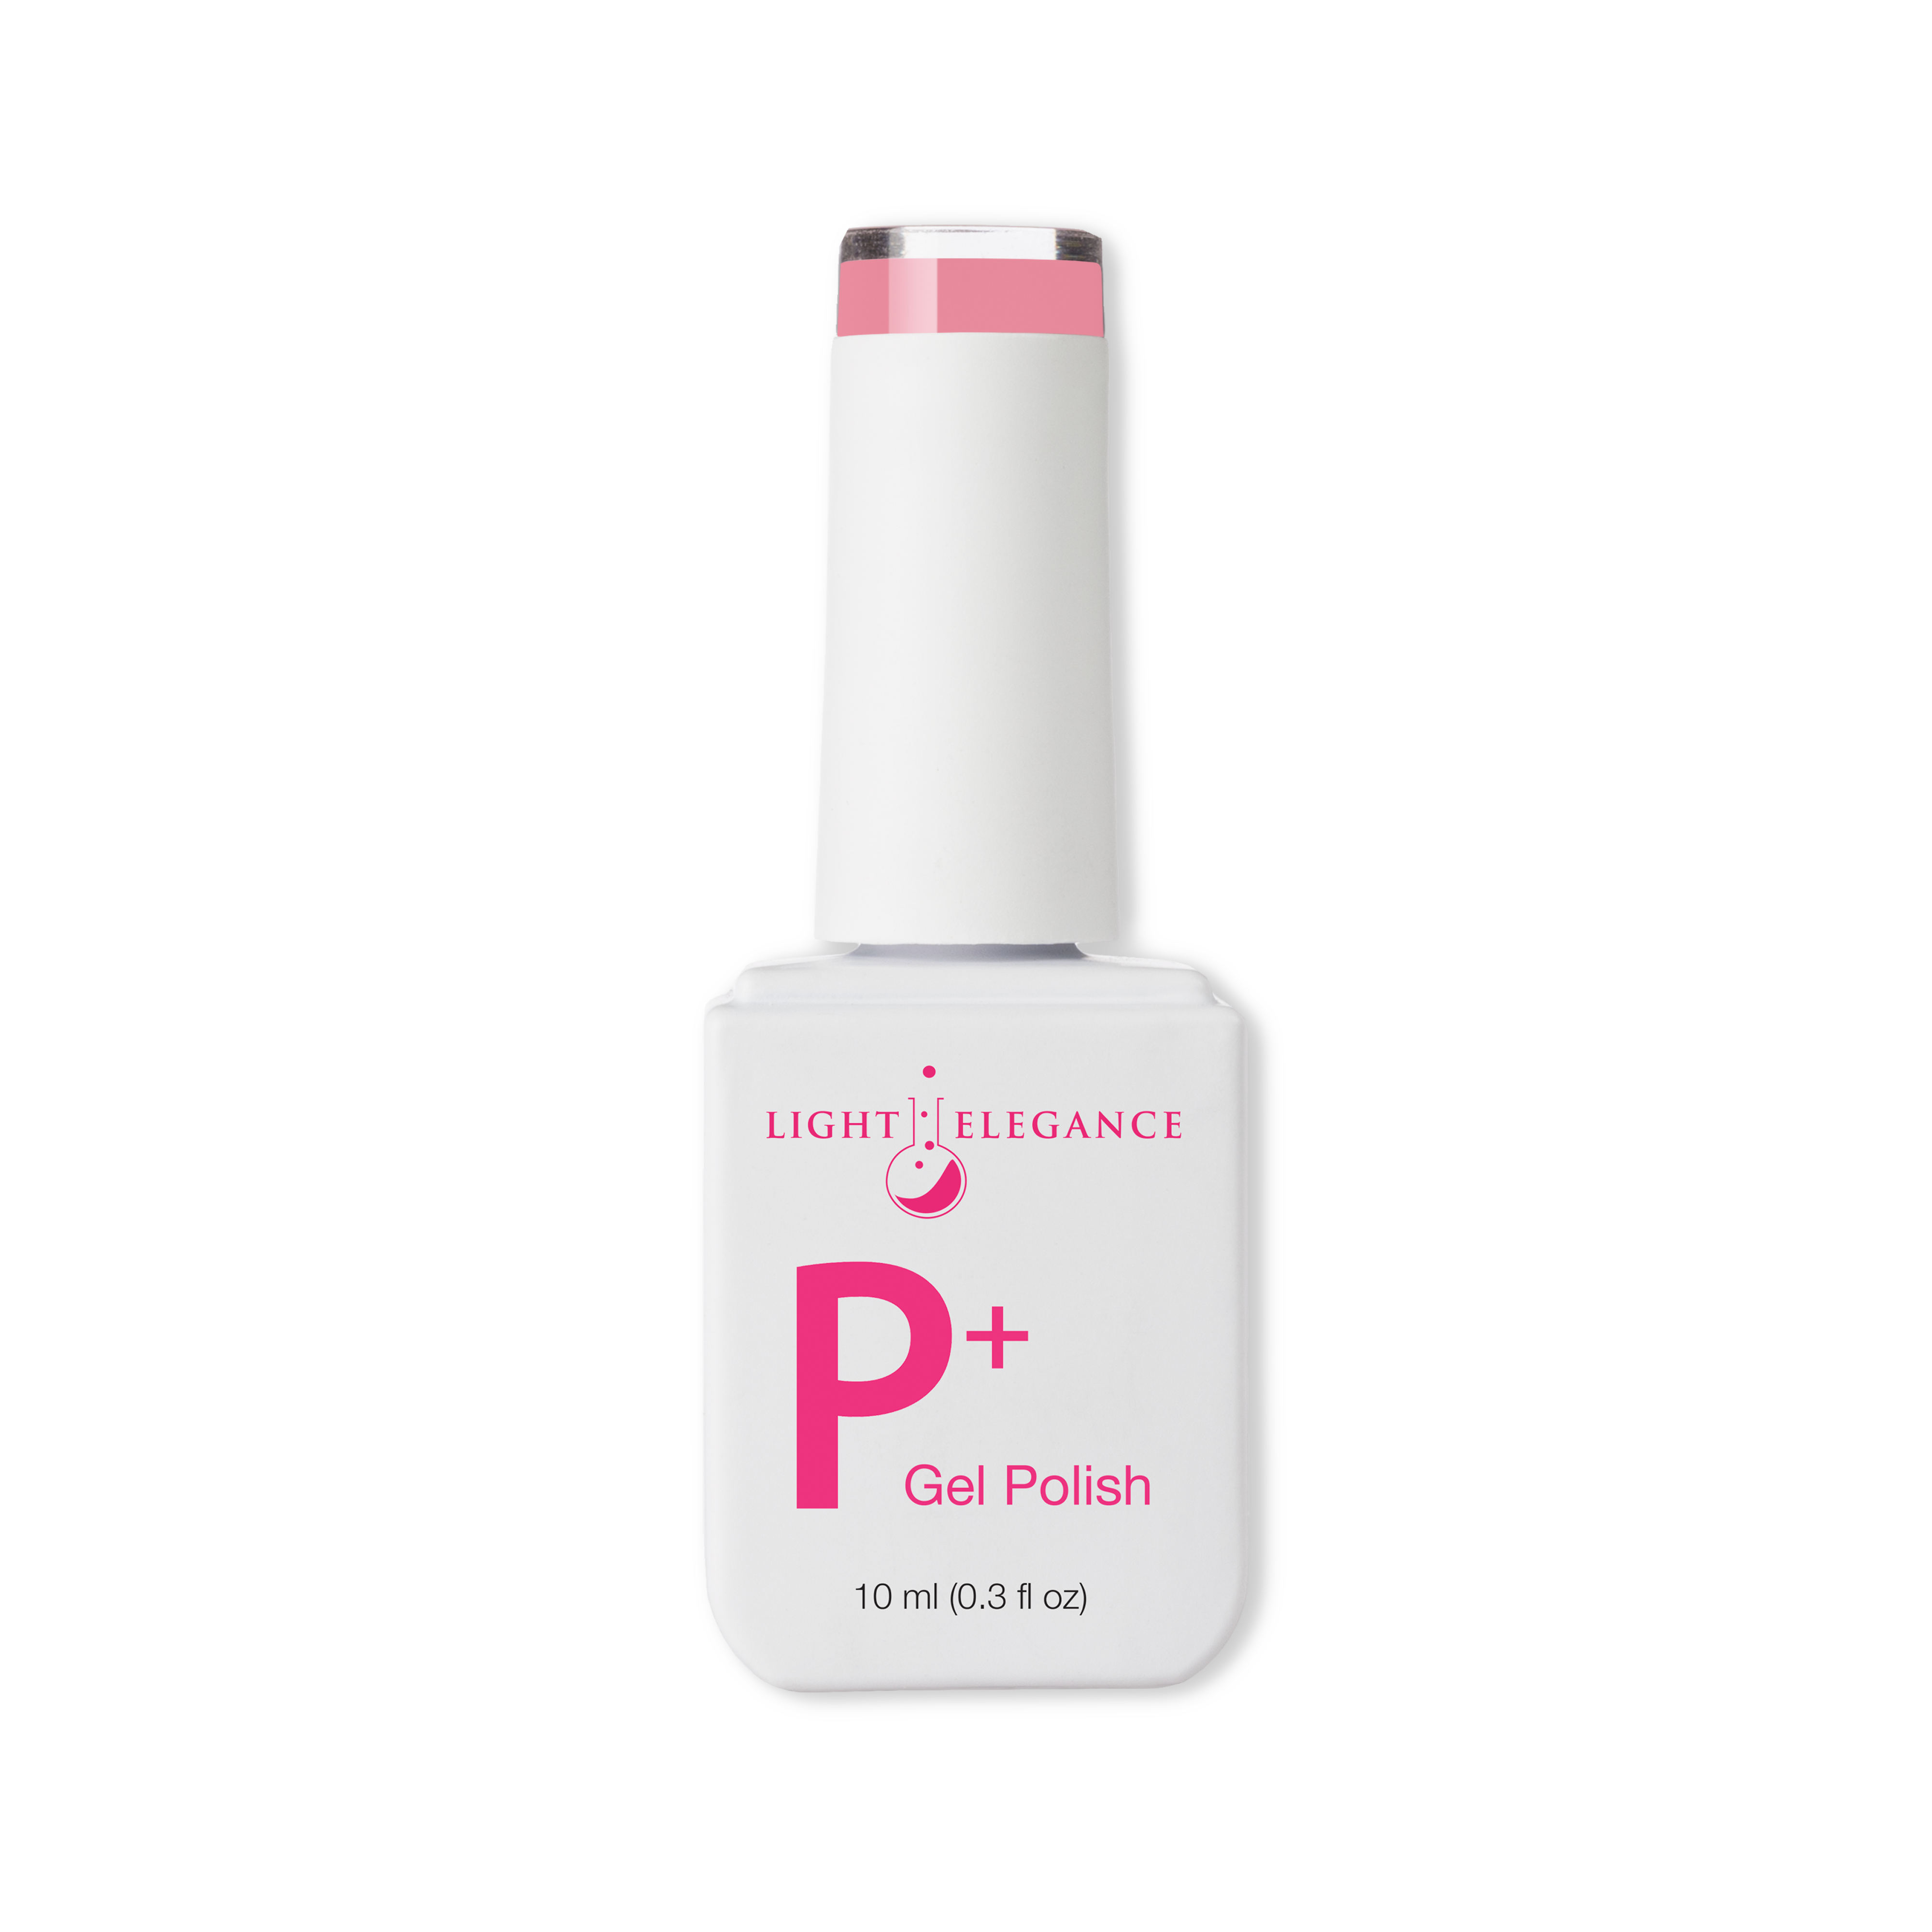 Light Elegance P+ Soak Off Color Gel - Flower Power :: New Packaging - Creata Beauty - Professional Beauty Products